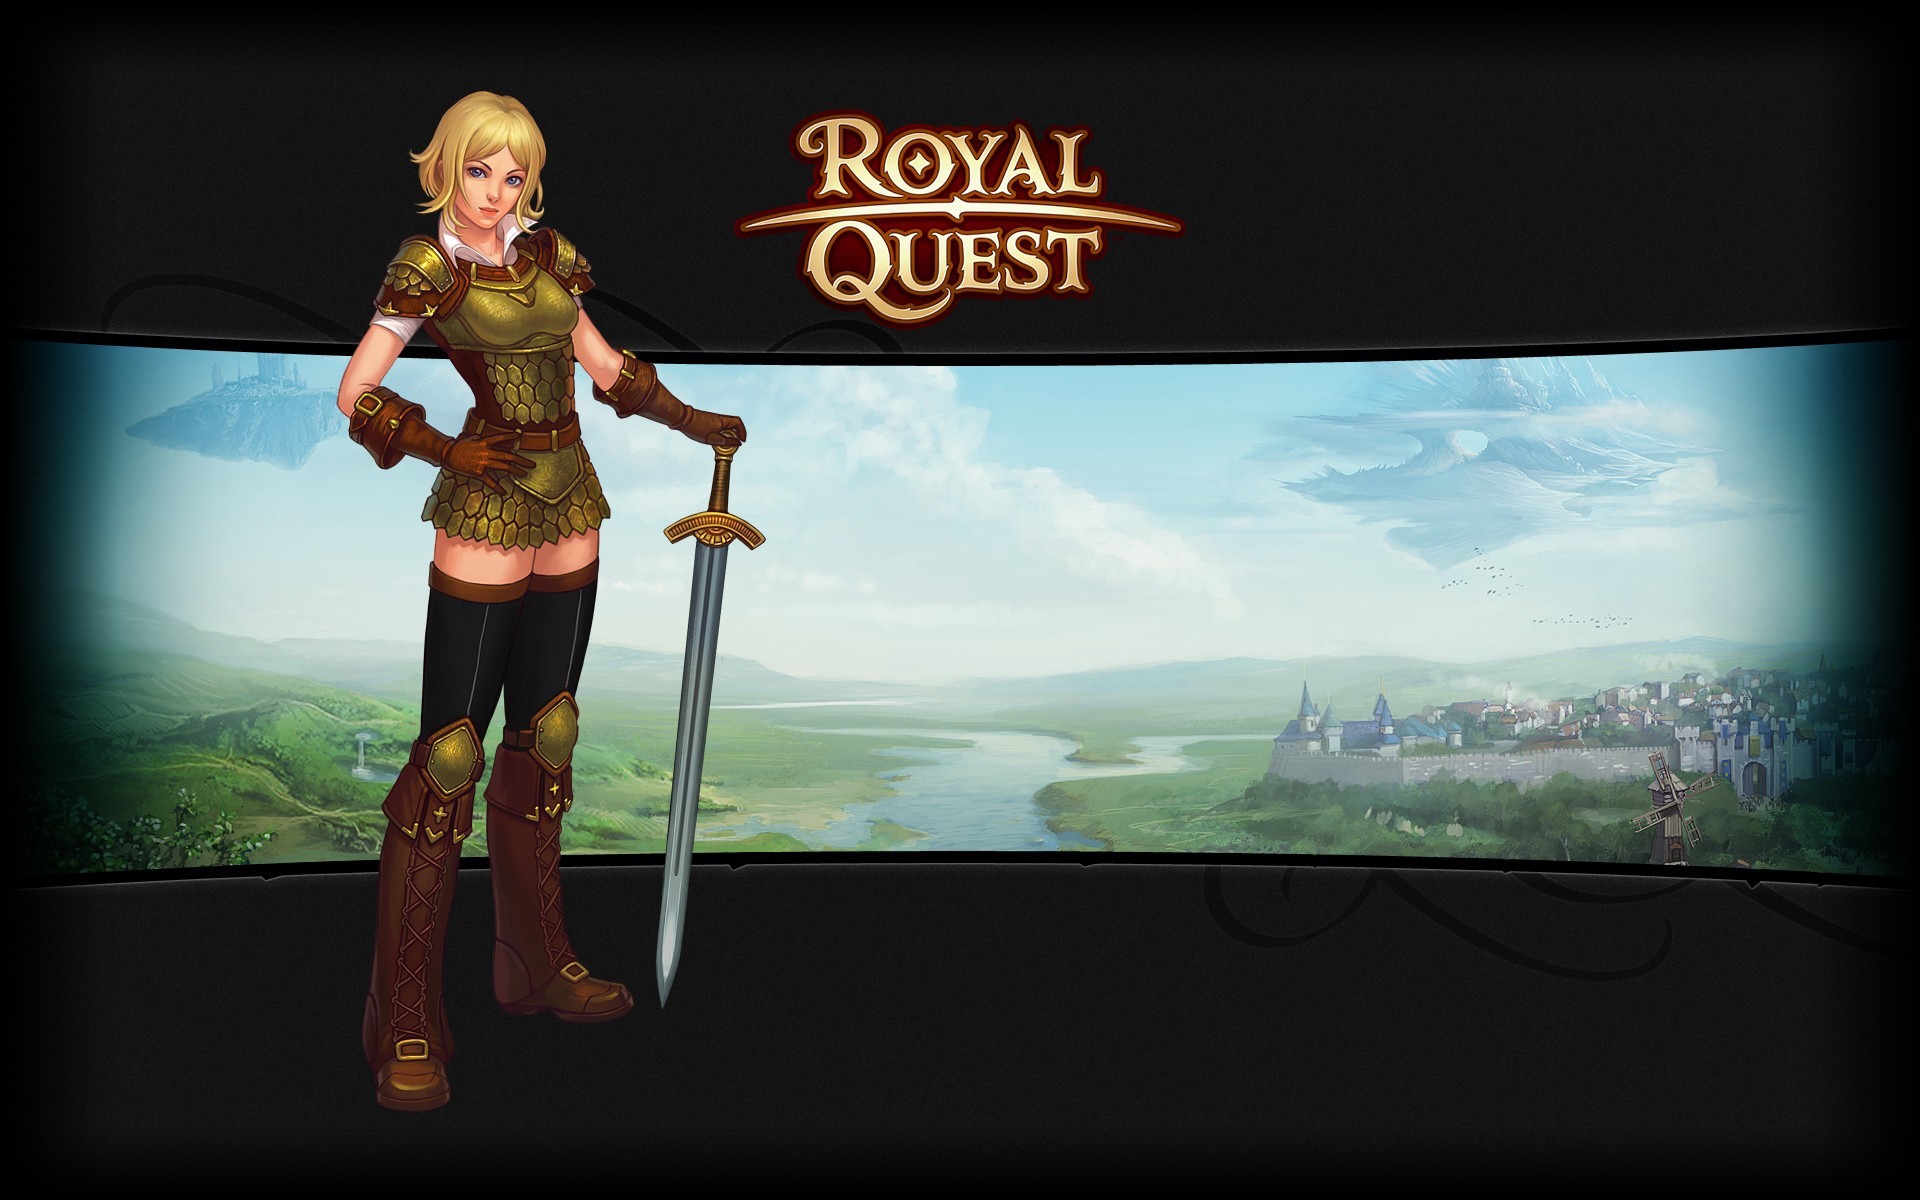 Royal Quest for 1920 x 1200 widescreen resolution